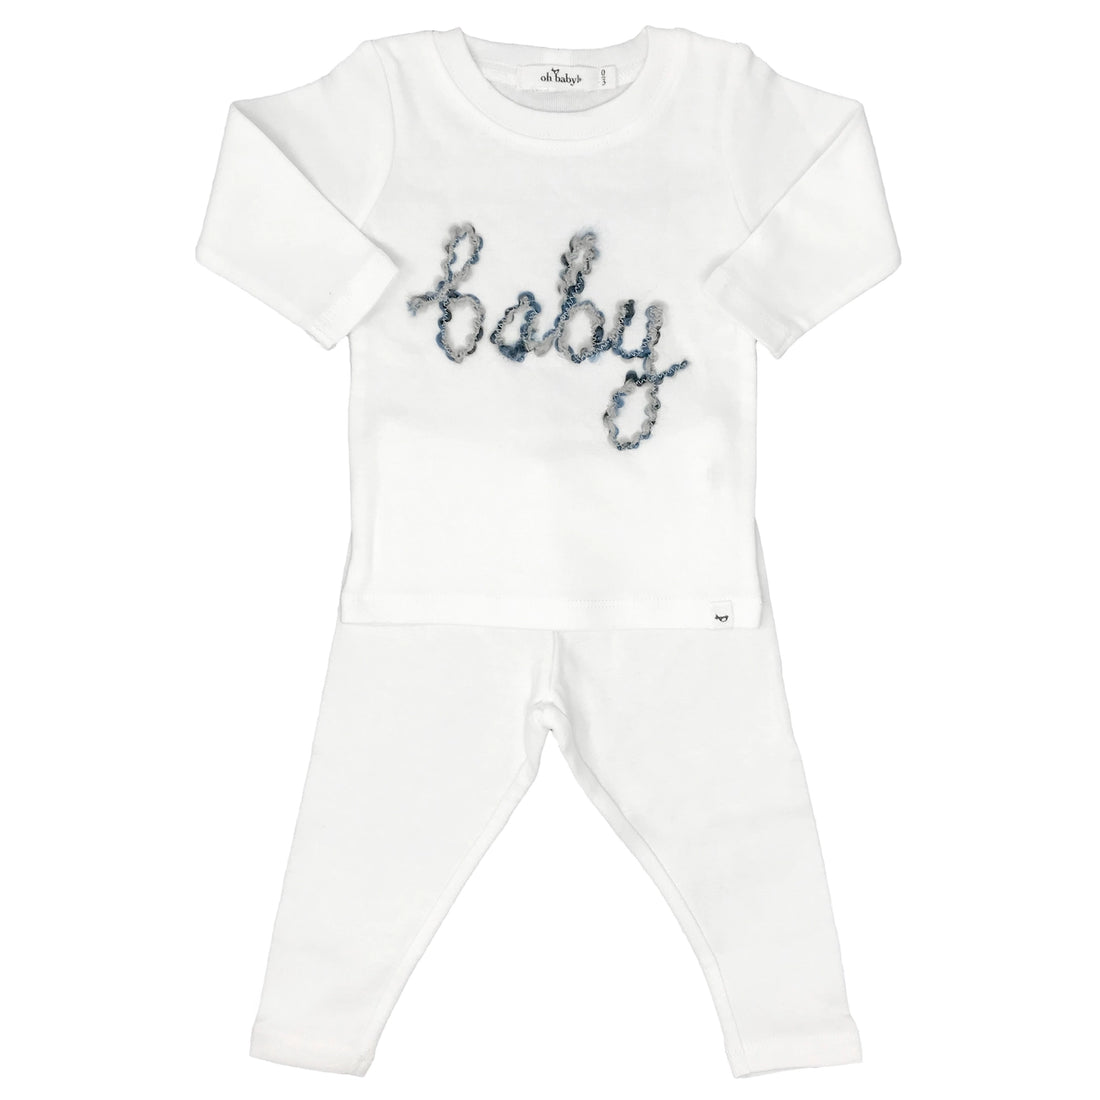 cream long sleeve top and long pants with baby written in multi blue thread